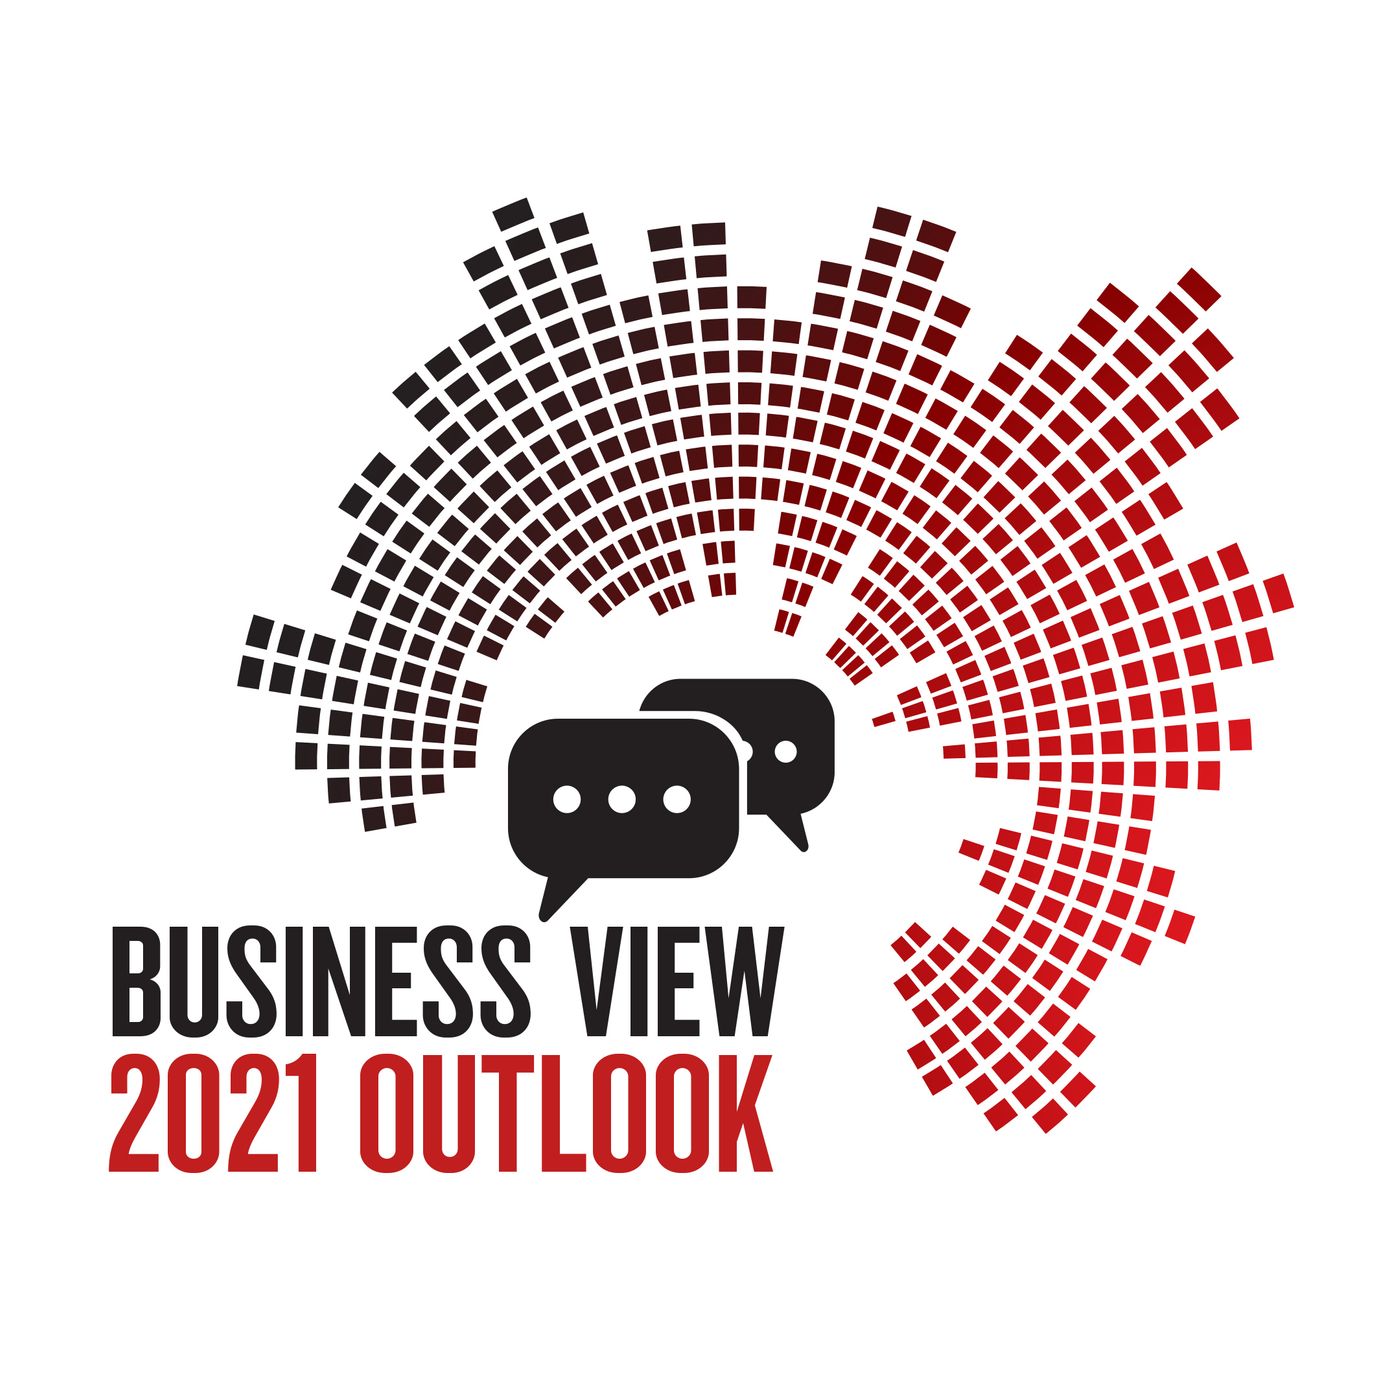 Business View: 2021 Outlook